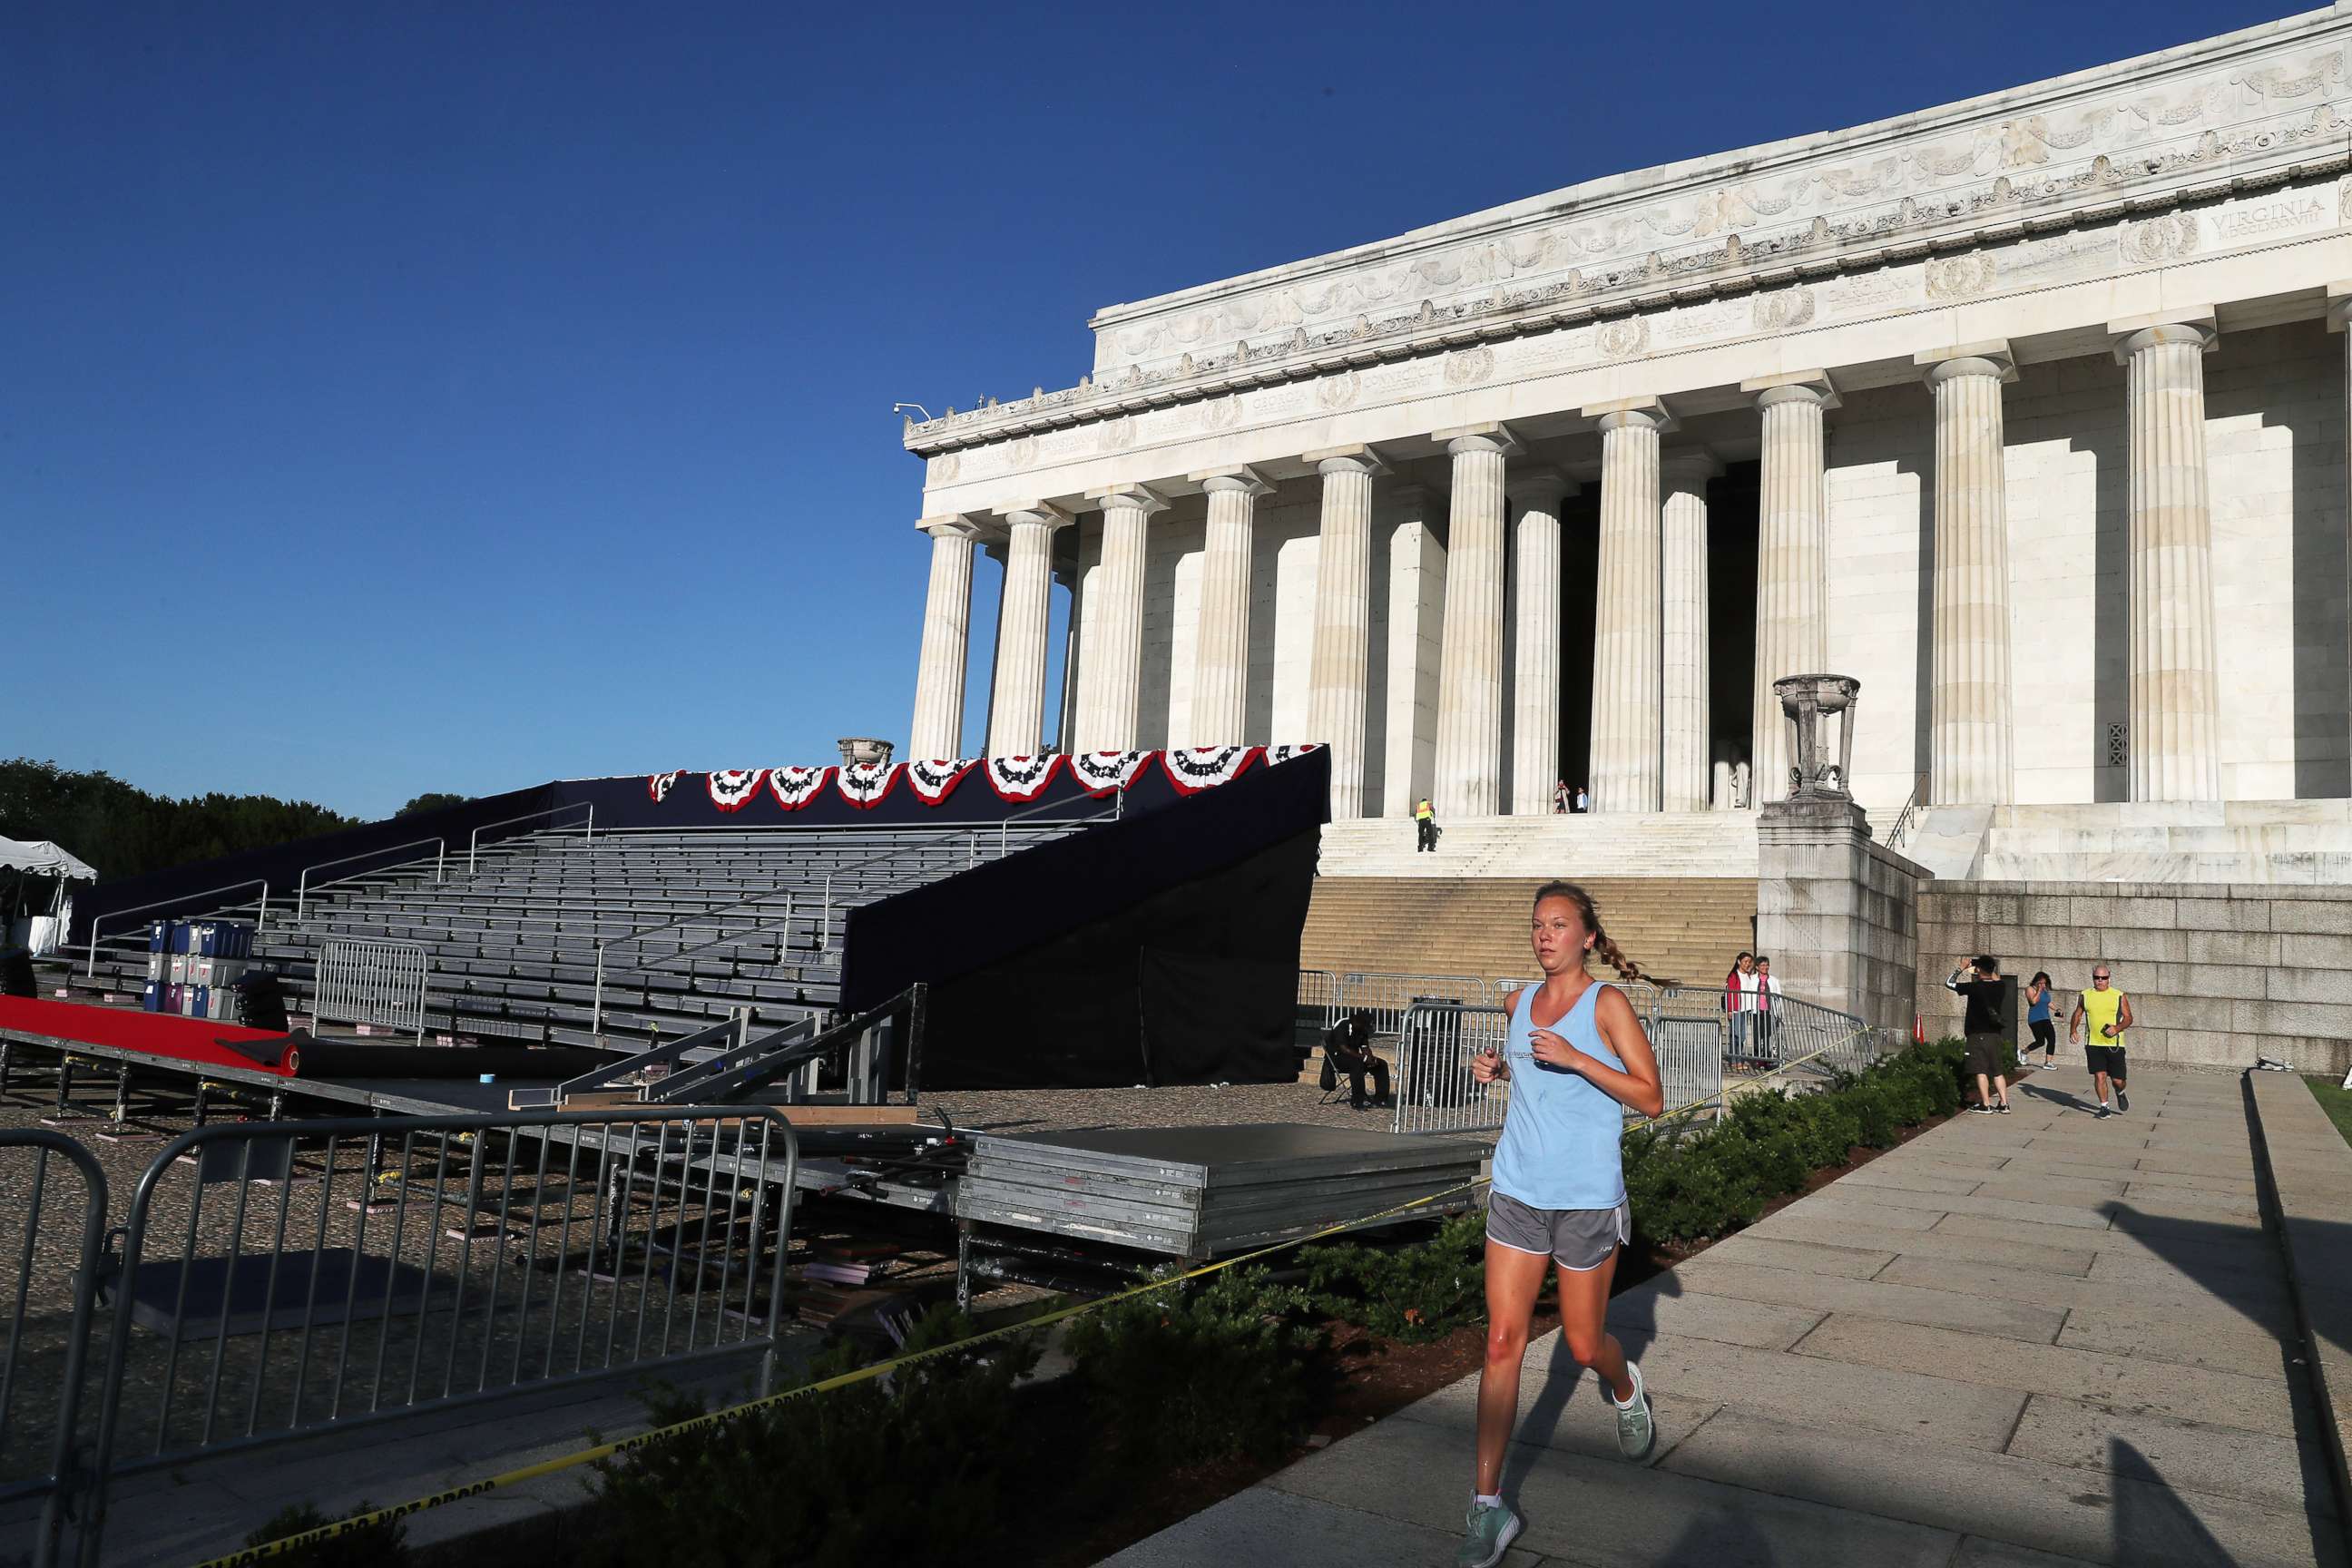 PHOTO: A jogger runs past the Lincoln Memorial ahead of the "July 4th Salute to America" celebration, July 2, 2019, in Washington, D.C.